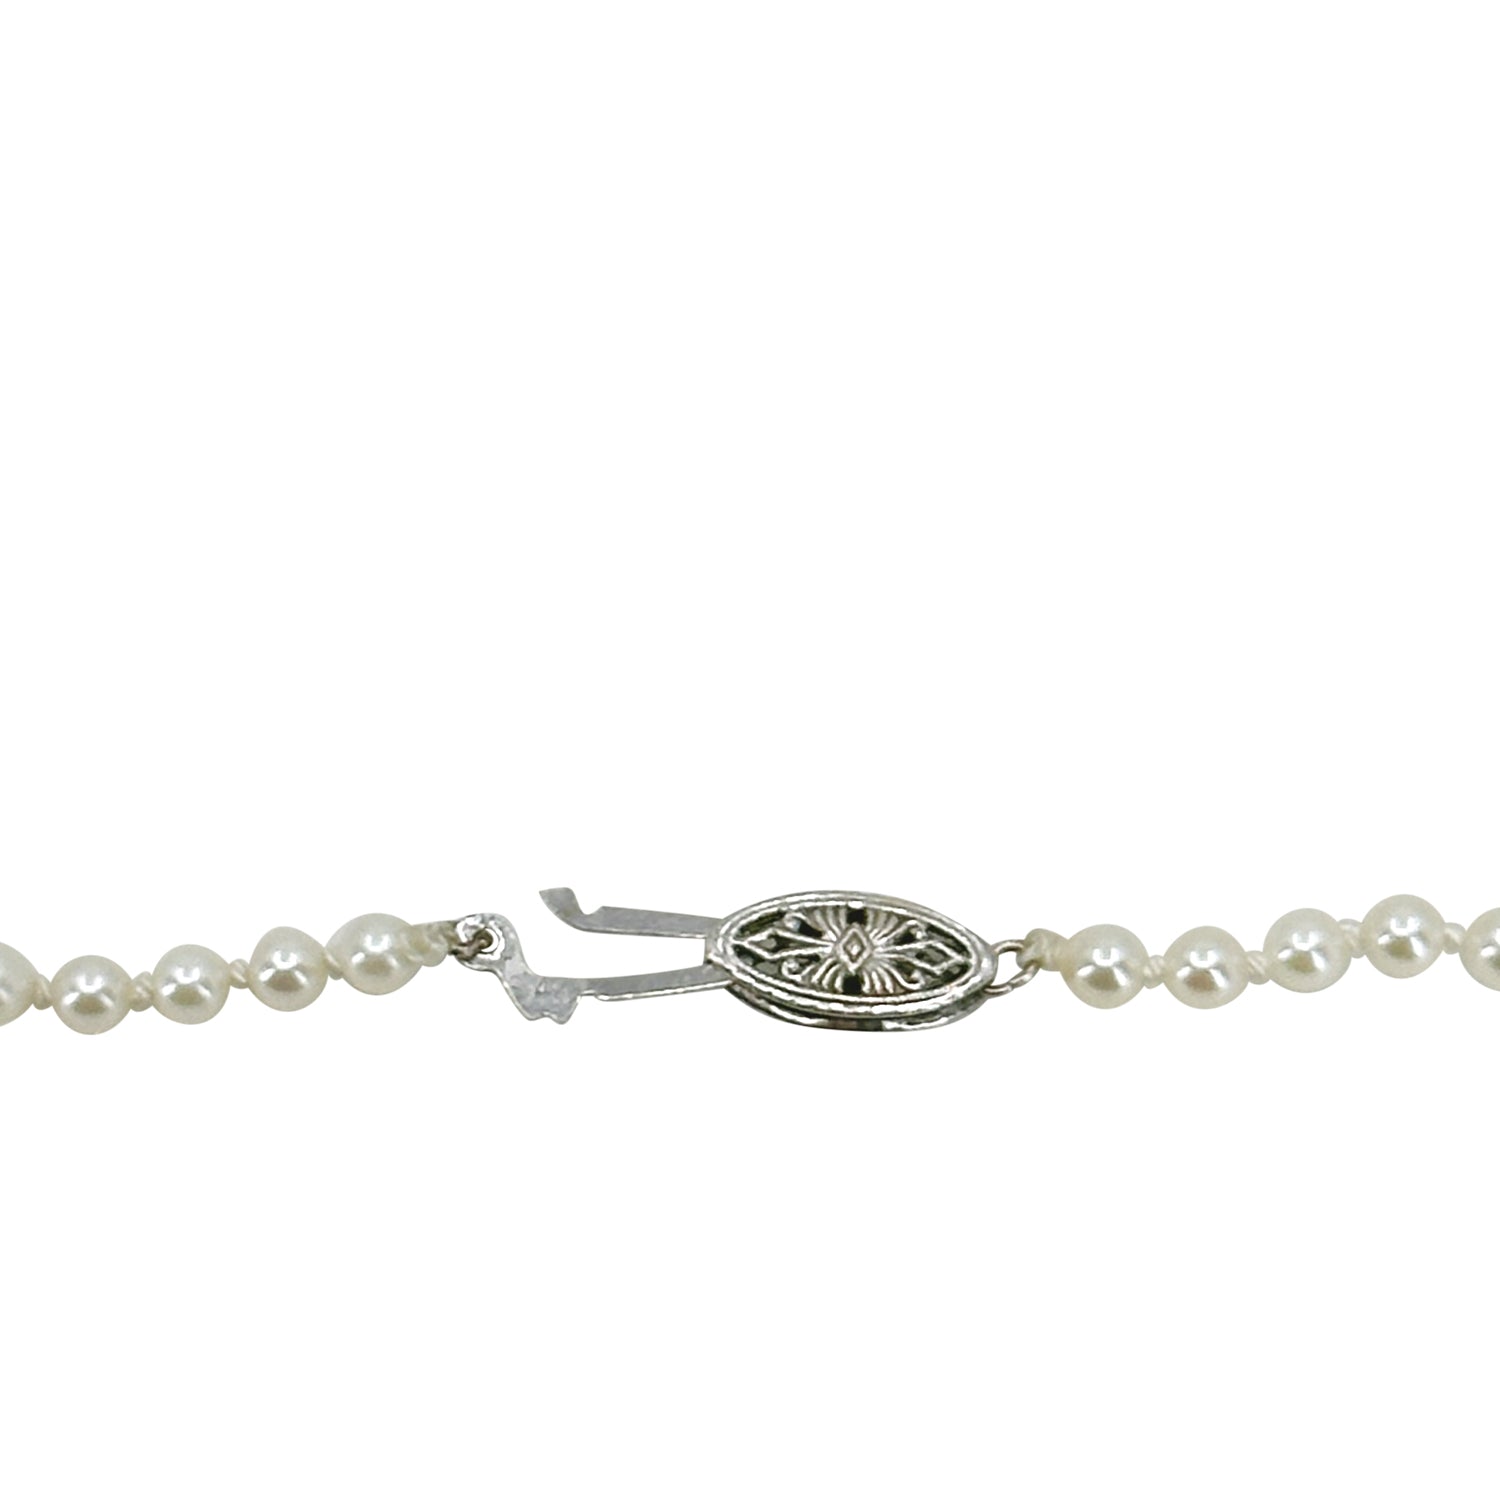 Graduated Mid Century Floral Japanese Saltwater Akoya Cultured Pearl Vintage Necklace - 14K White Gold 20.50 Inch